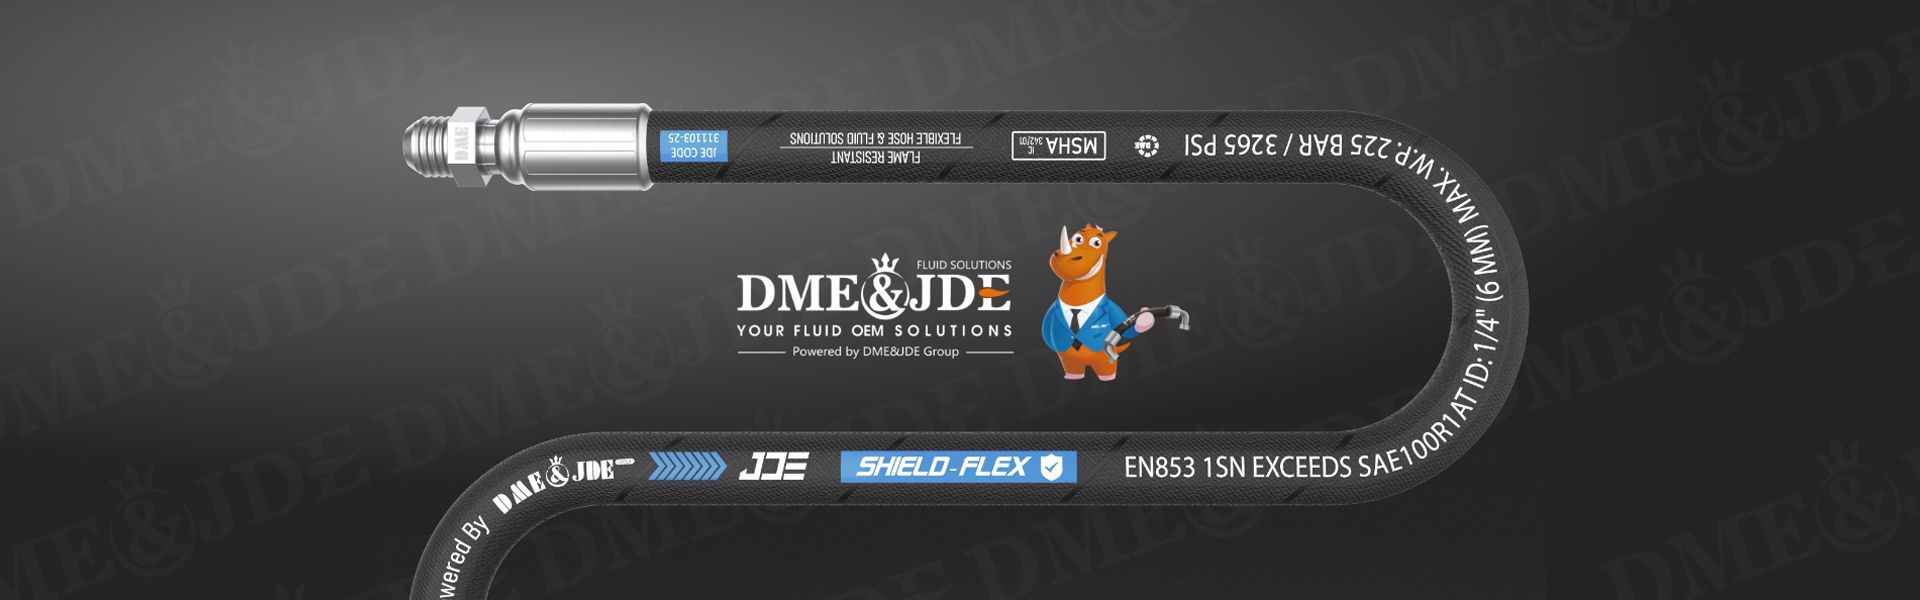 A bending hydraulic hoses shows DME&JDE logo and related hose information.